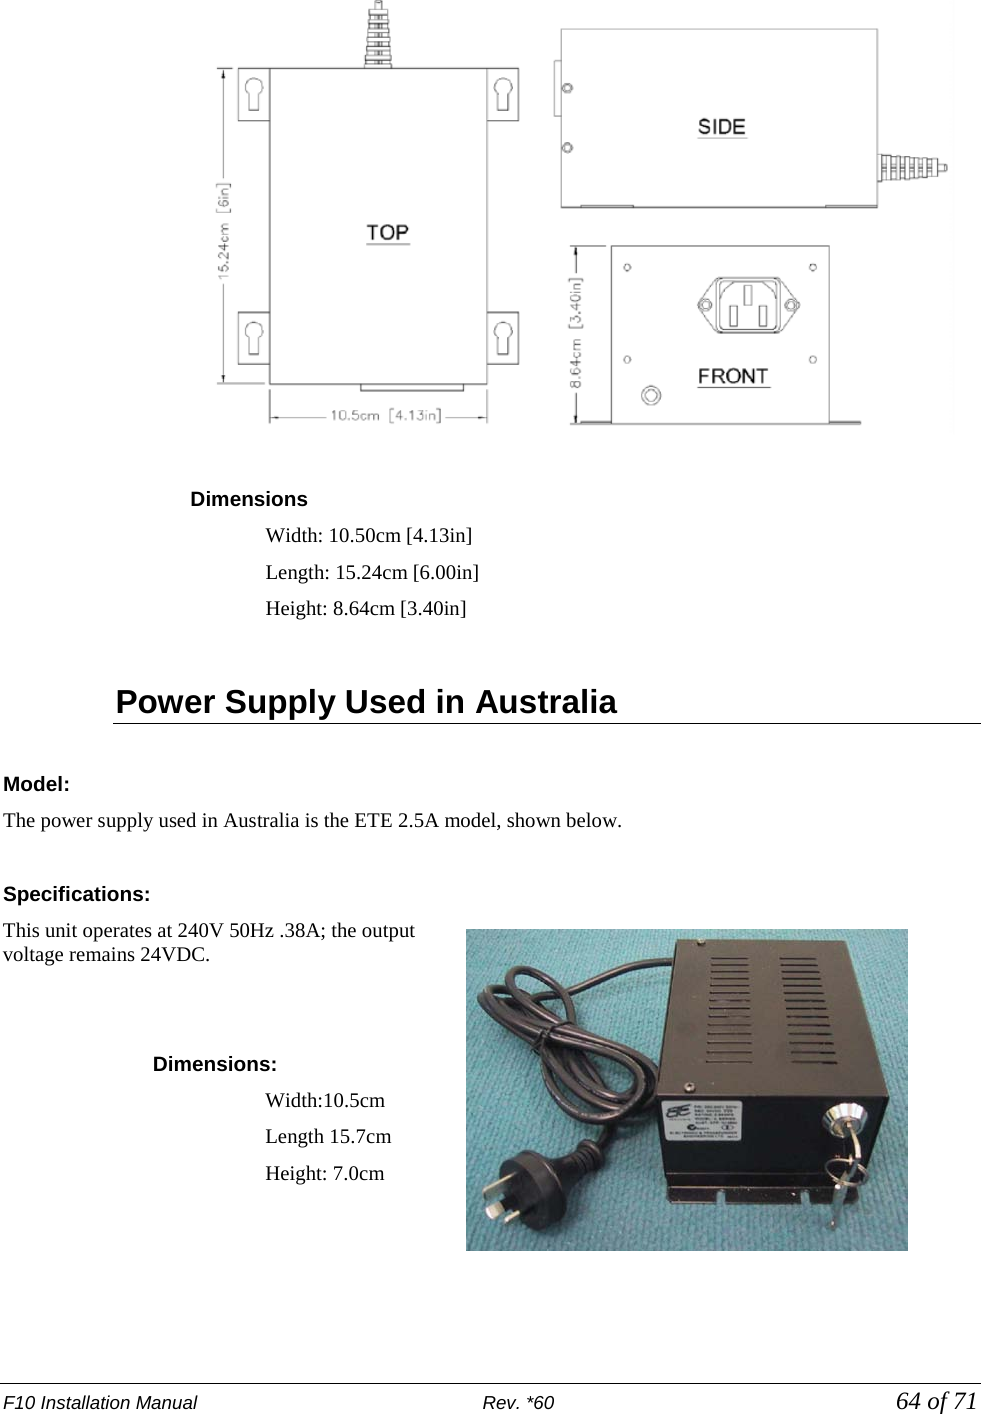 F10 Installation Manual                          Rev. *60            64 of 71   Dimensions  Width: 10.50cm [4.13in]  Length: 15.24cm [6.00in]  Height: 8.64cm [3.40in]  Power Supply Used in Australia   Model: The power supply used in Australia is the ETE 2.5A model, shown below.   Specifications: This unit operates at 240V 50Hz .38A; the output voltage remains 24VDC.    Dimensions:  Width:10.5cm  Length 15.7cm Height: 7.0cm    